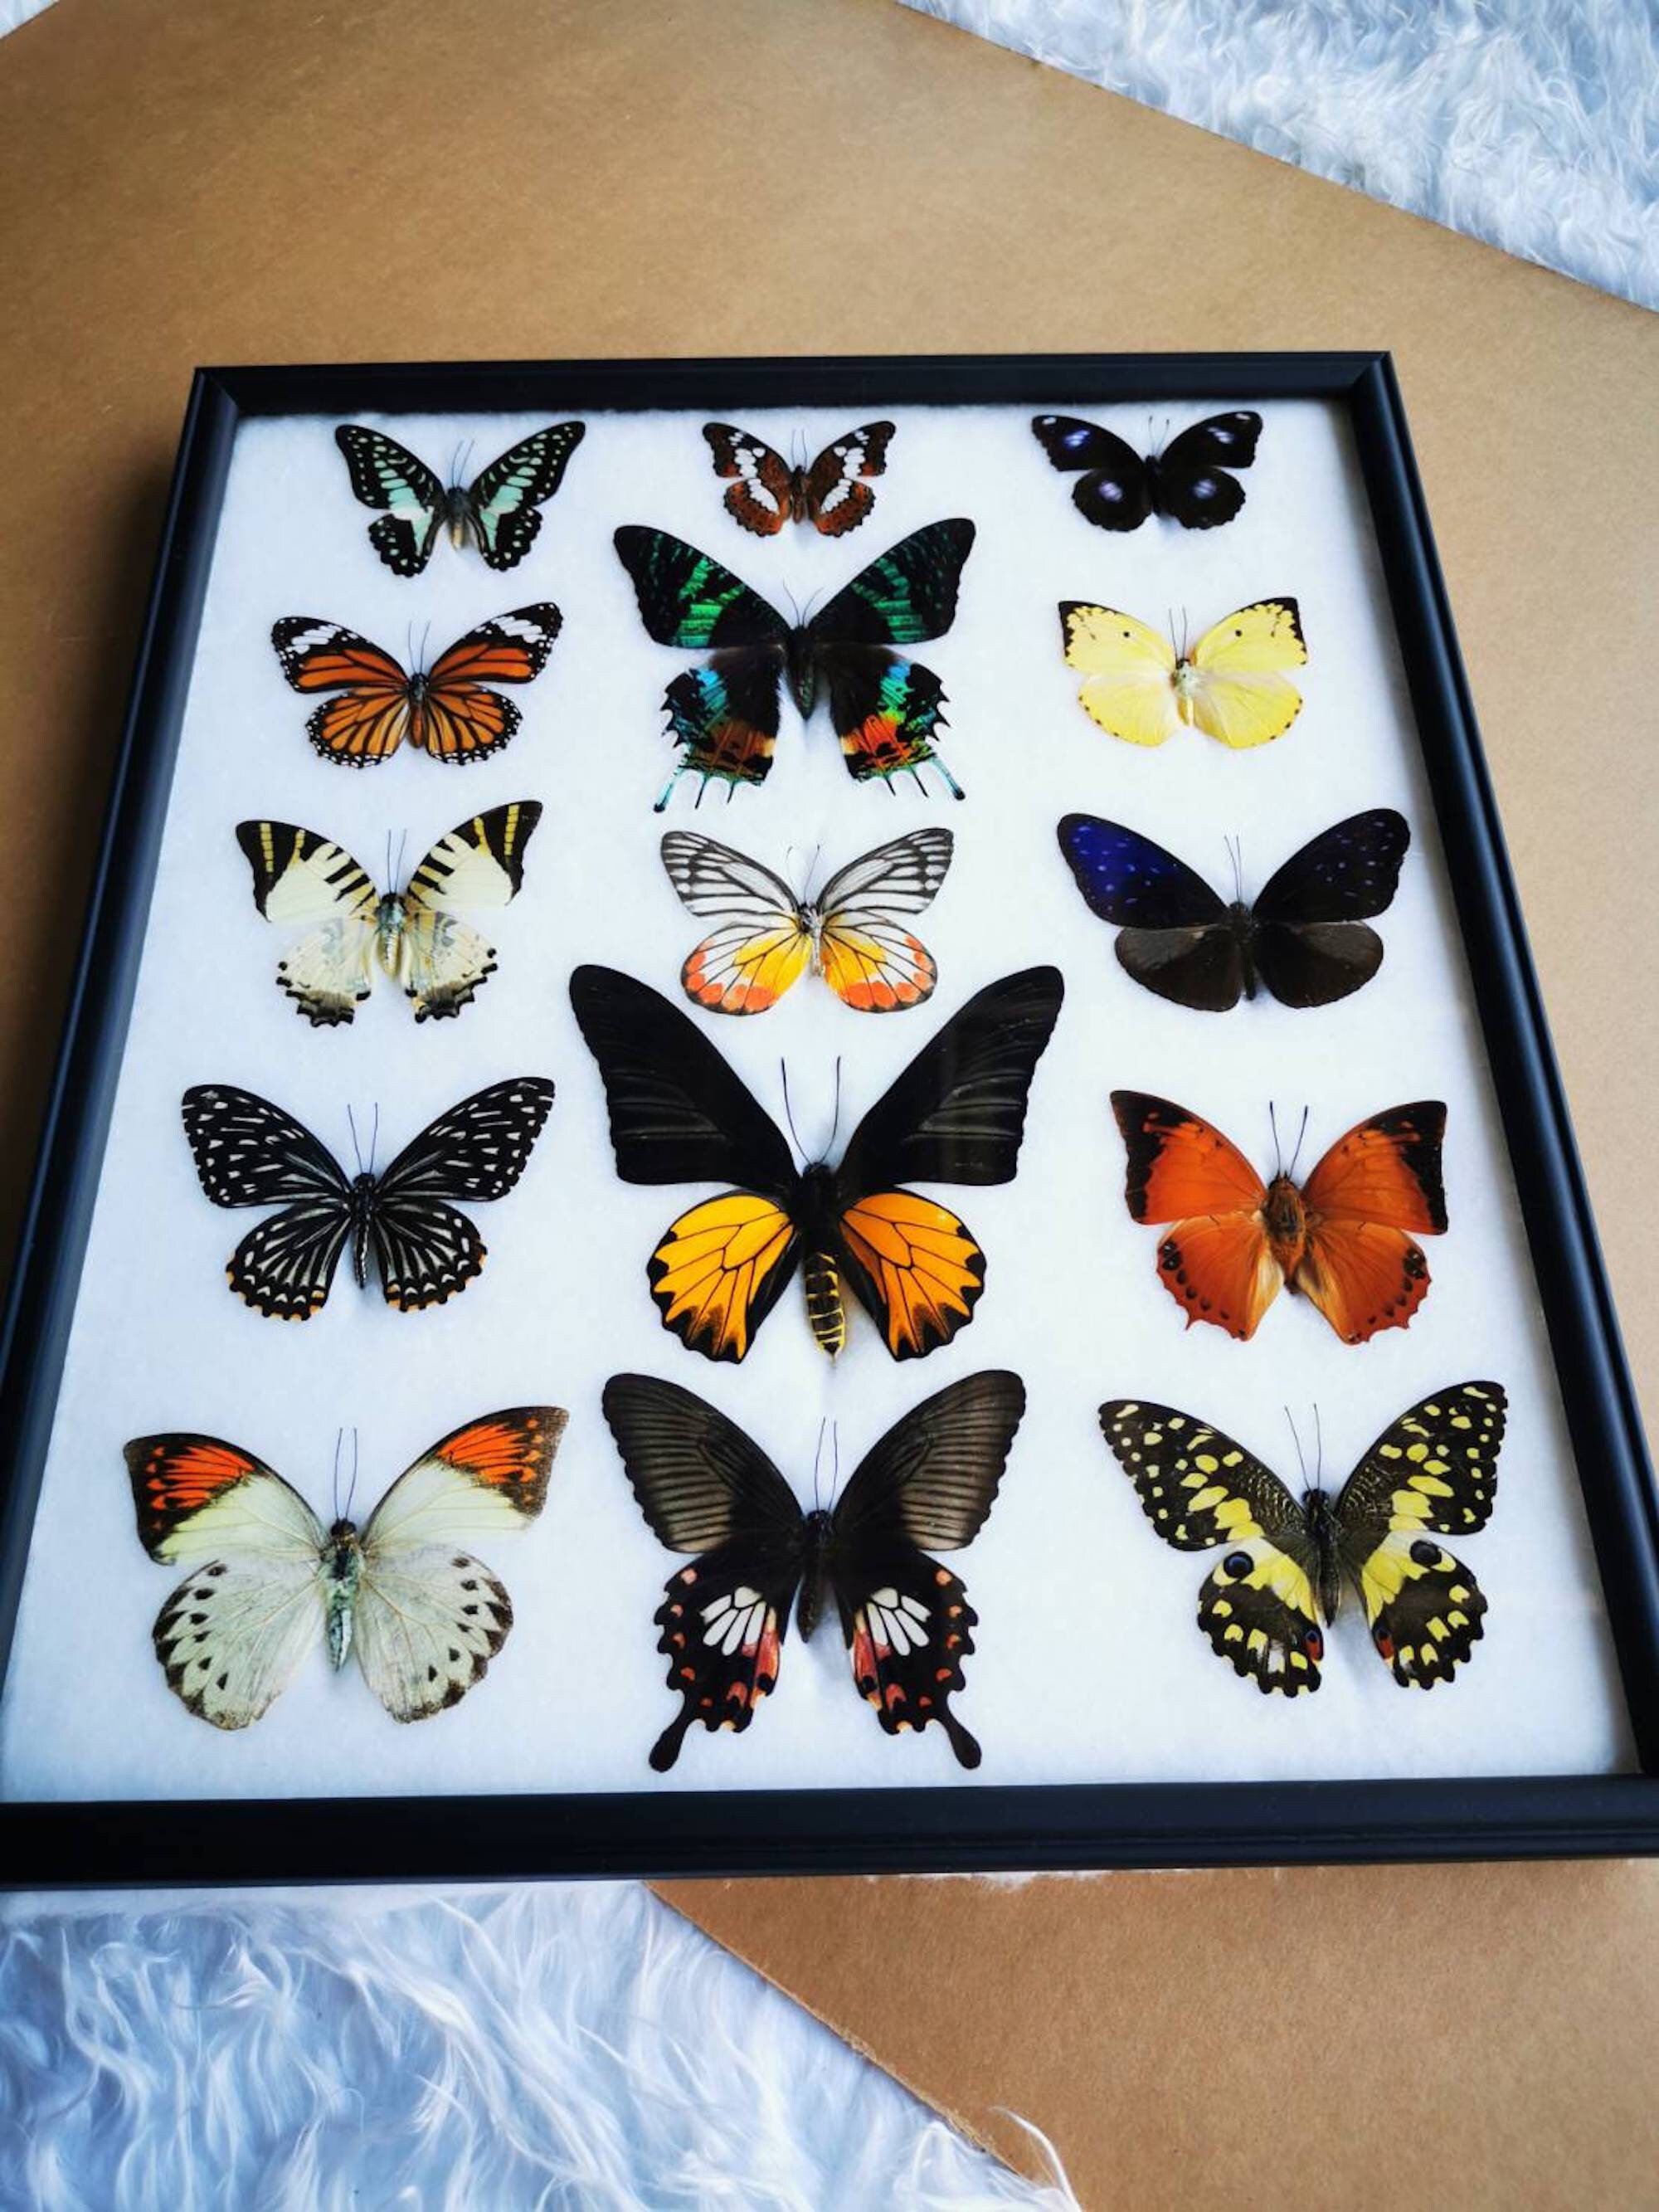 15 Pcs Real Taxidermy Butterfly - Butterfly Specimen Artwork Material  Decor, Taxidermy Animals: : Industrial & Scientific